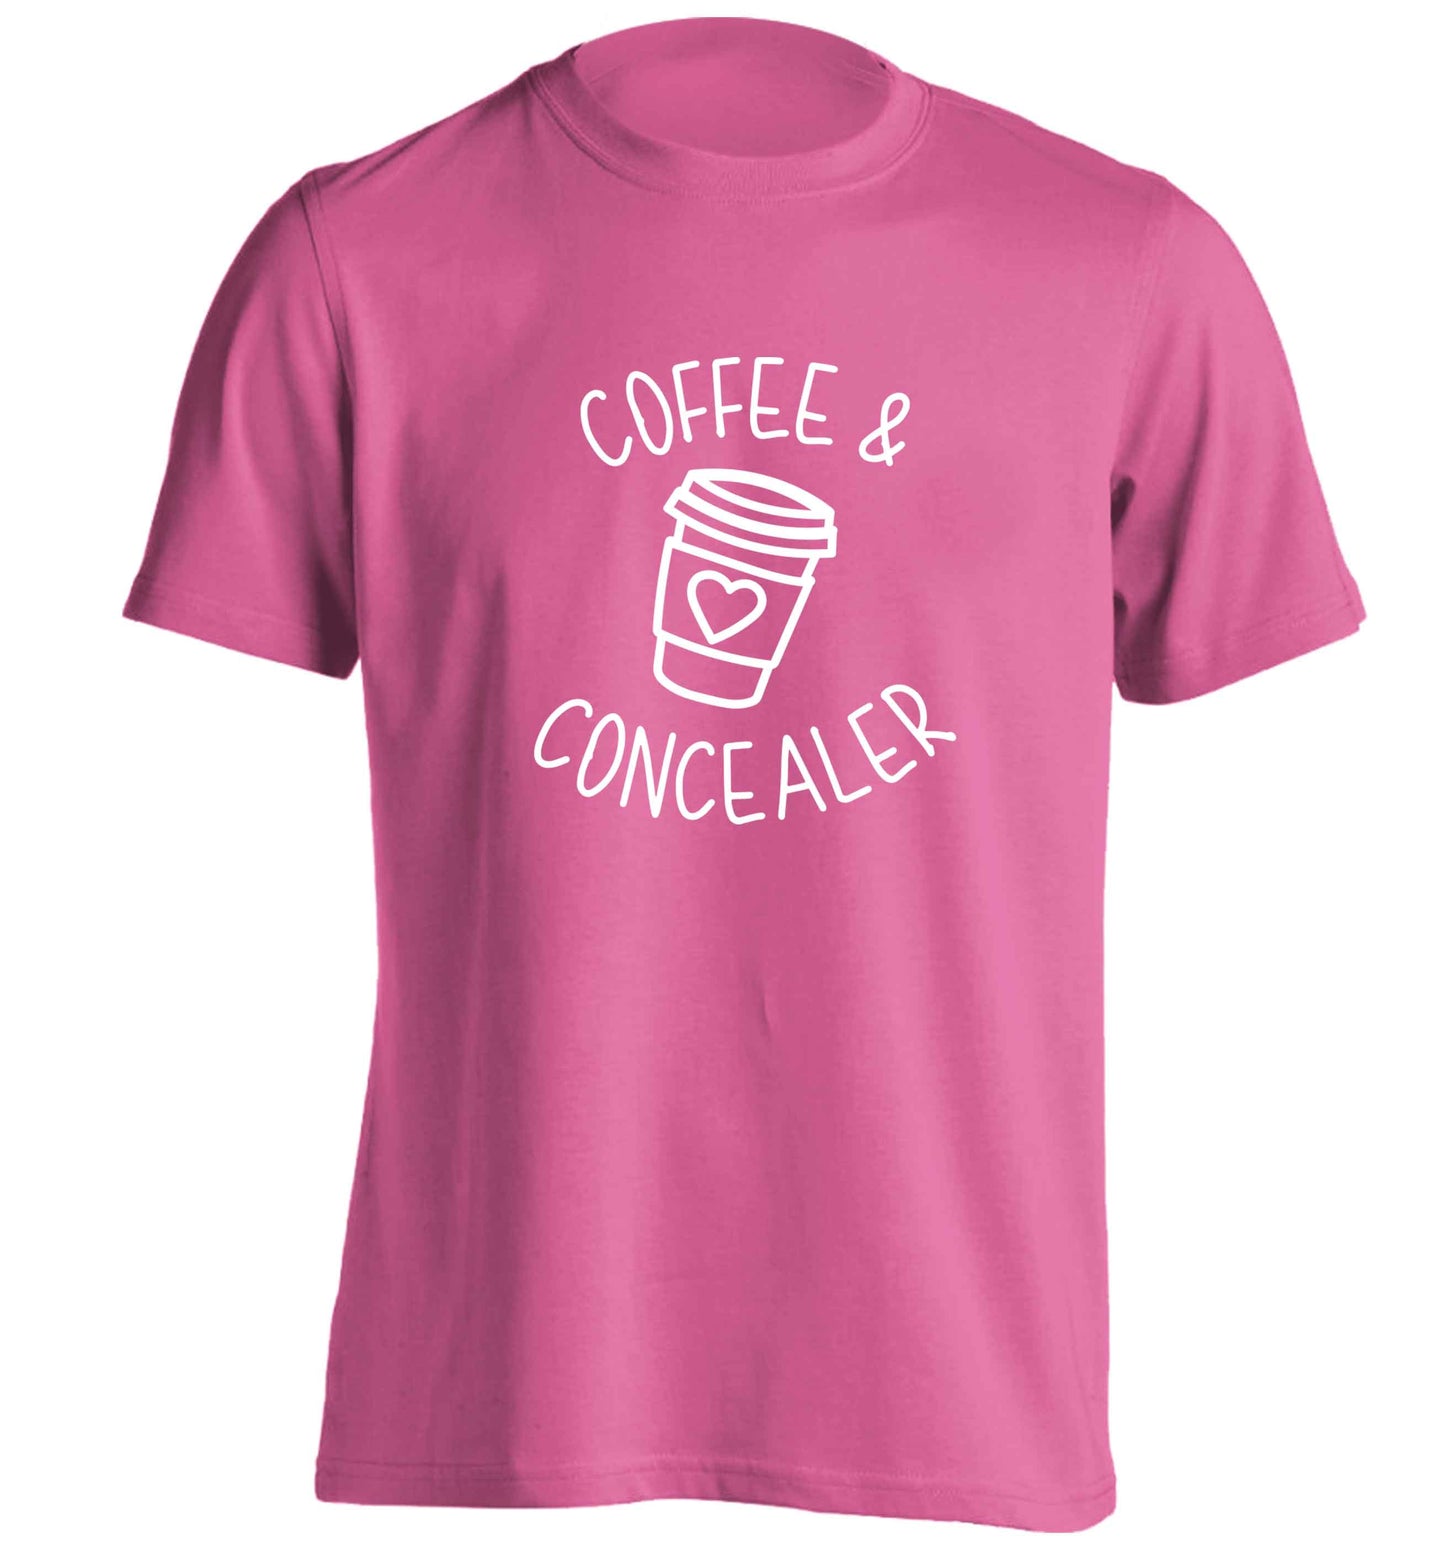 Coffee and concealer adults unisex pink Tshirt 2XL